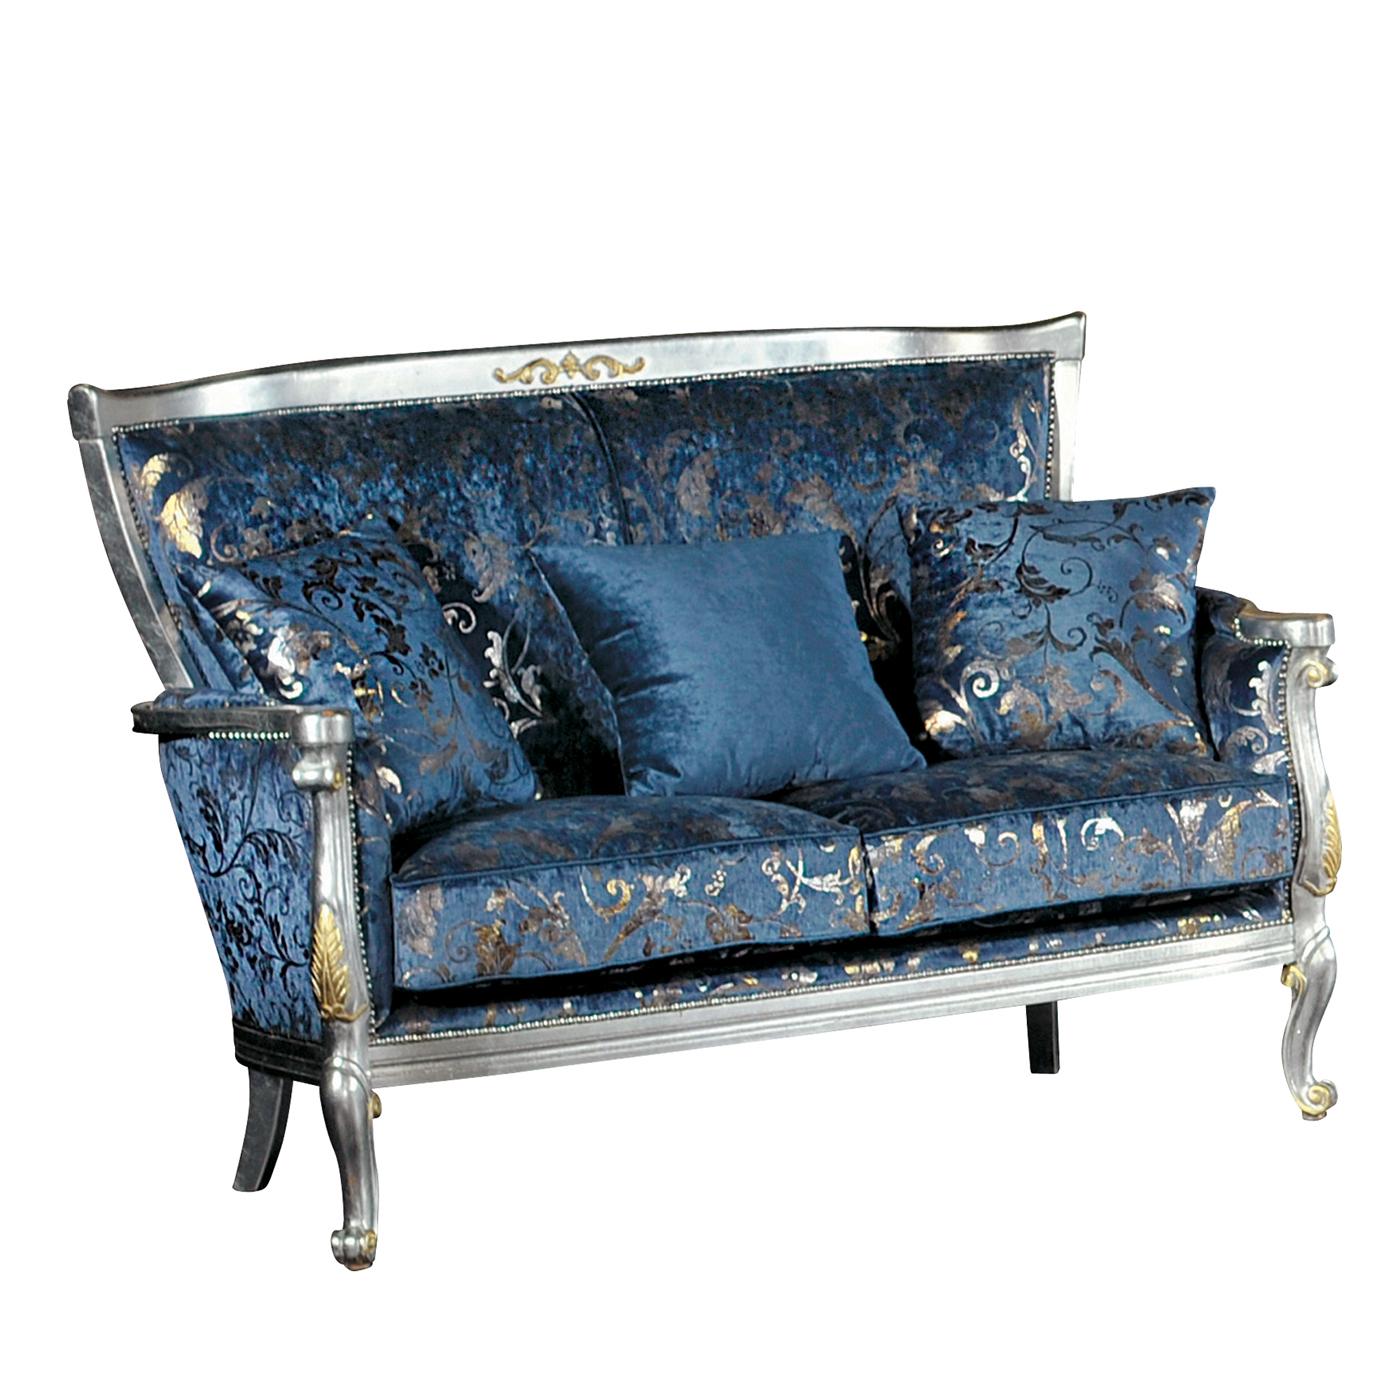 Fabric two-seat sofa in silver and blue shades. The floral pattern of the seat and backrest illuminate the environment and reflect the color of the structure, a refined mix of gold and silver. A Queen Anne style piece of furniture.